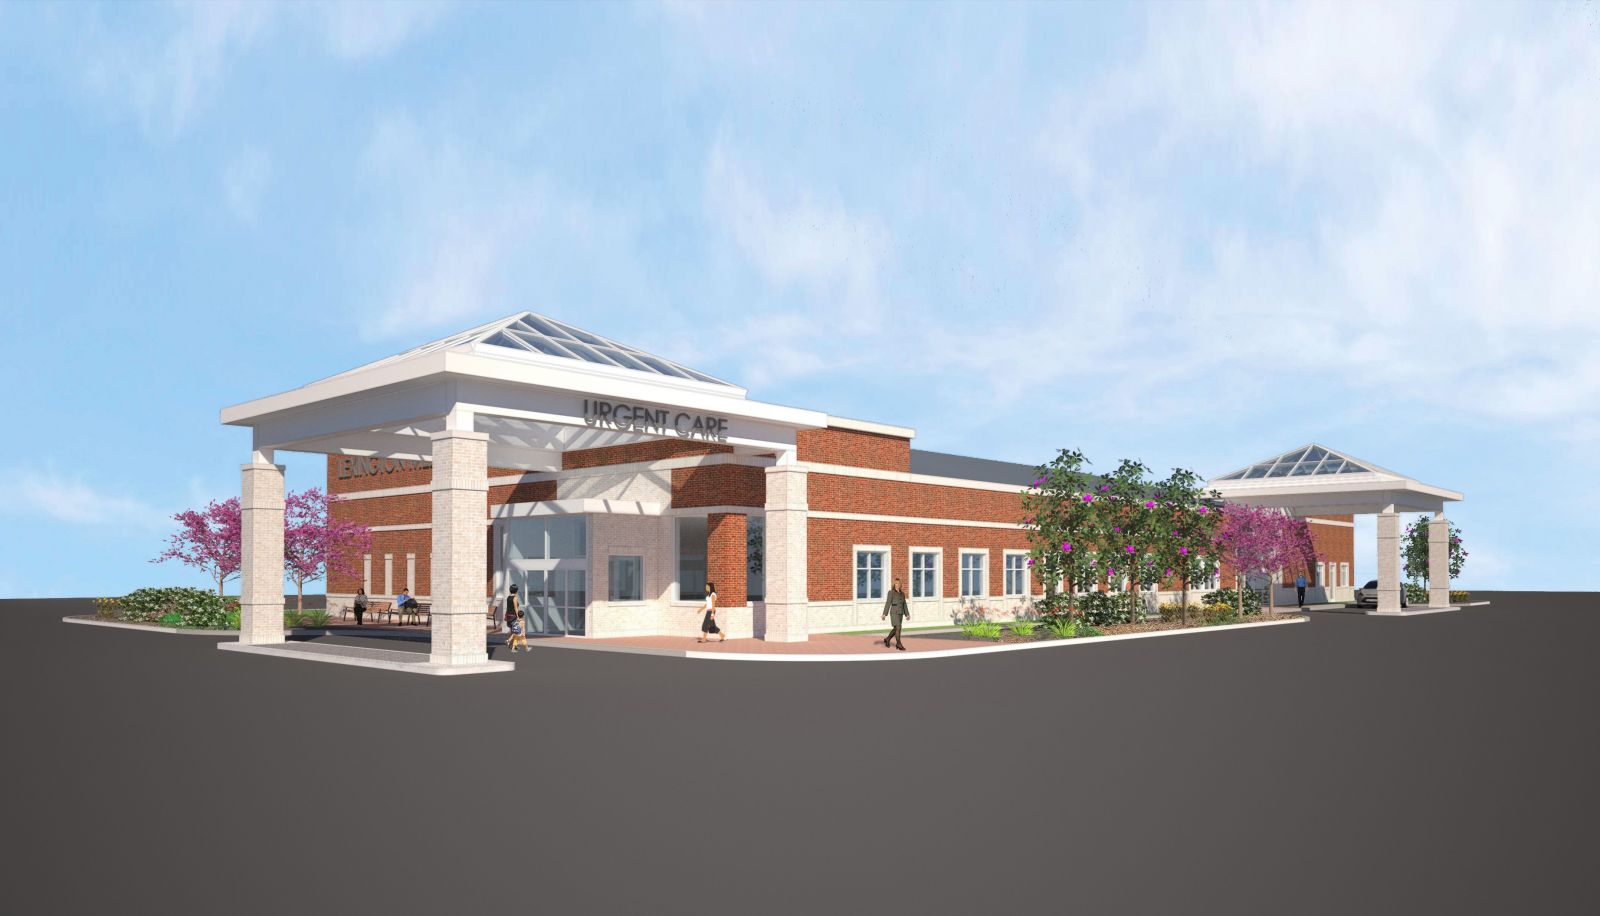 Lexington Medical Center Saluda Pointe is now open near the intersection of Interstate 20 and U.S. Highway 378. (Rendering/Provided)